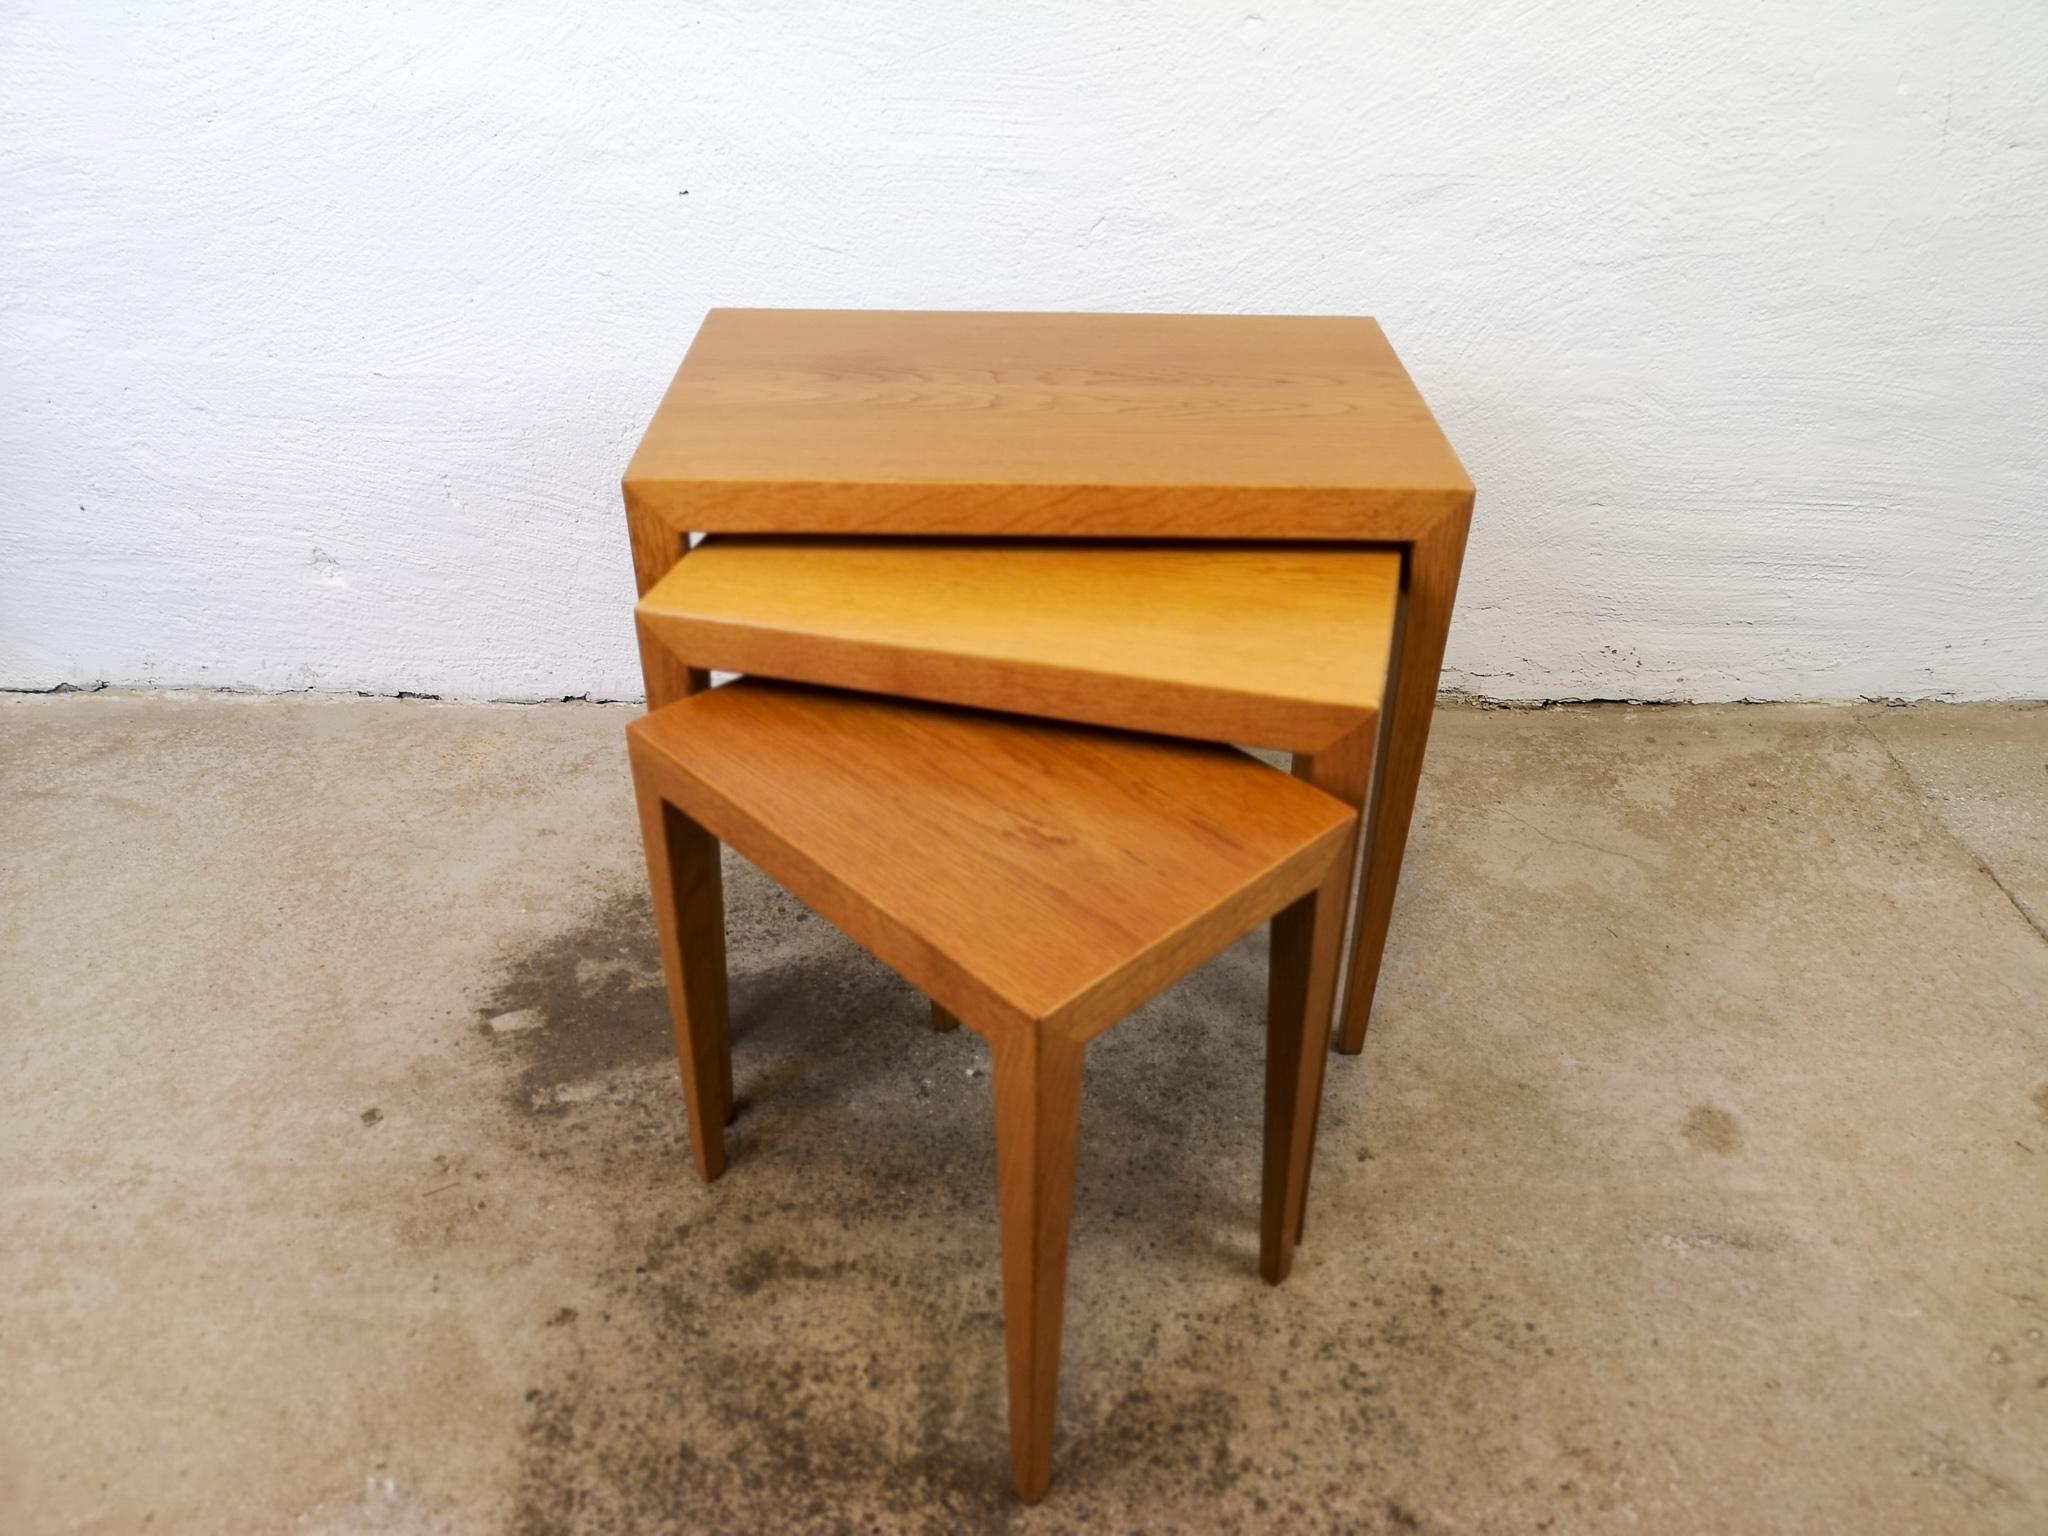 These nesting tables was produced in Denmark at Haslev Mobelsnedkeri. Its designed by Severin Hansen. His designed is easily recognized if you look at where the legs meet the top. Perfectly match they are and makes the table look like a piece of